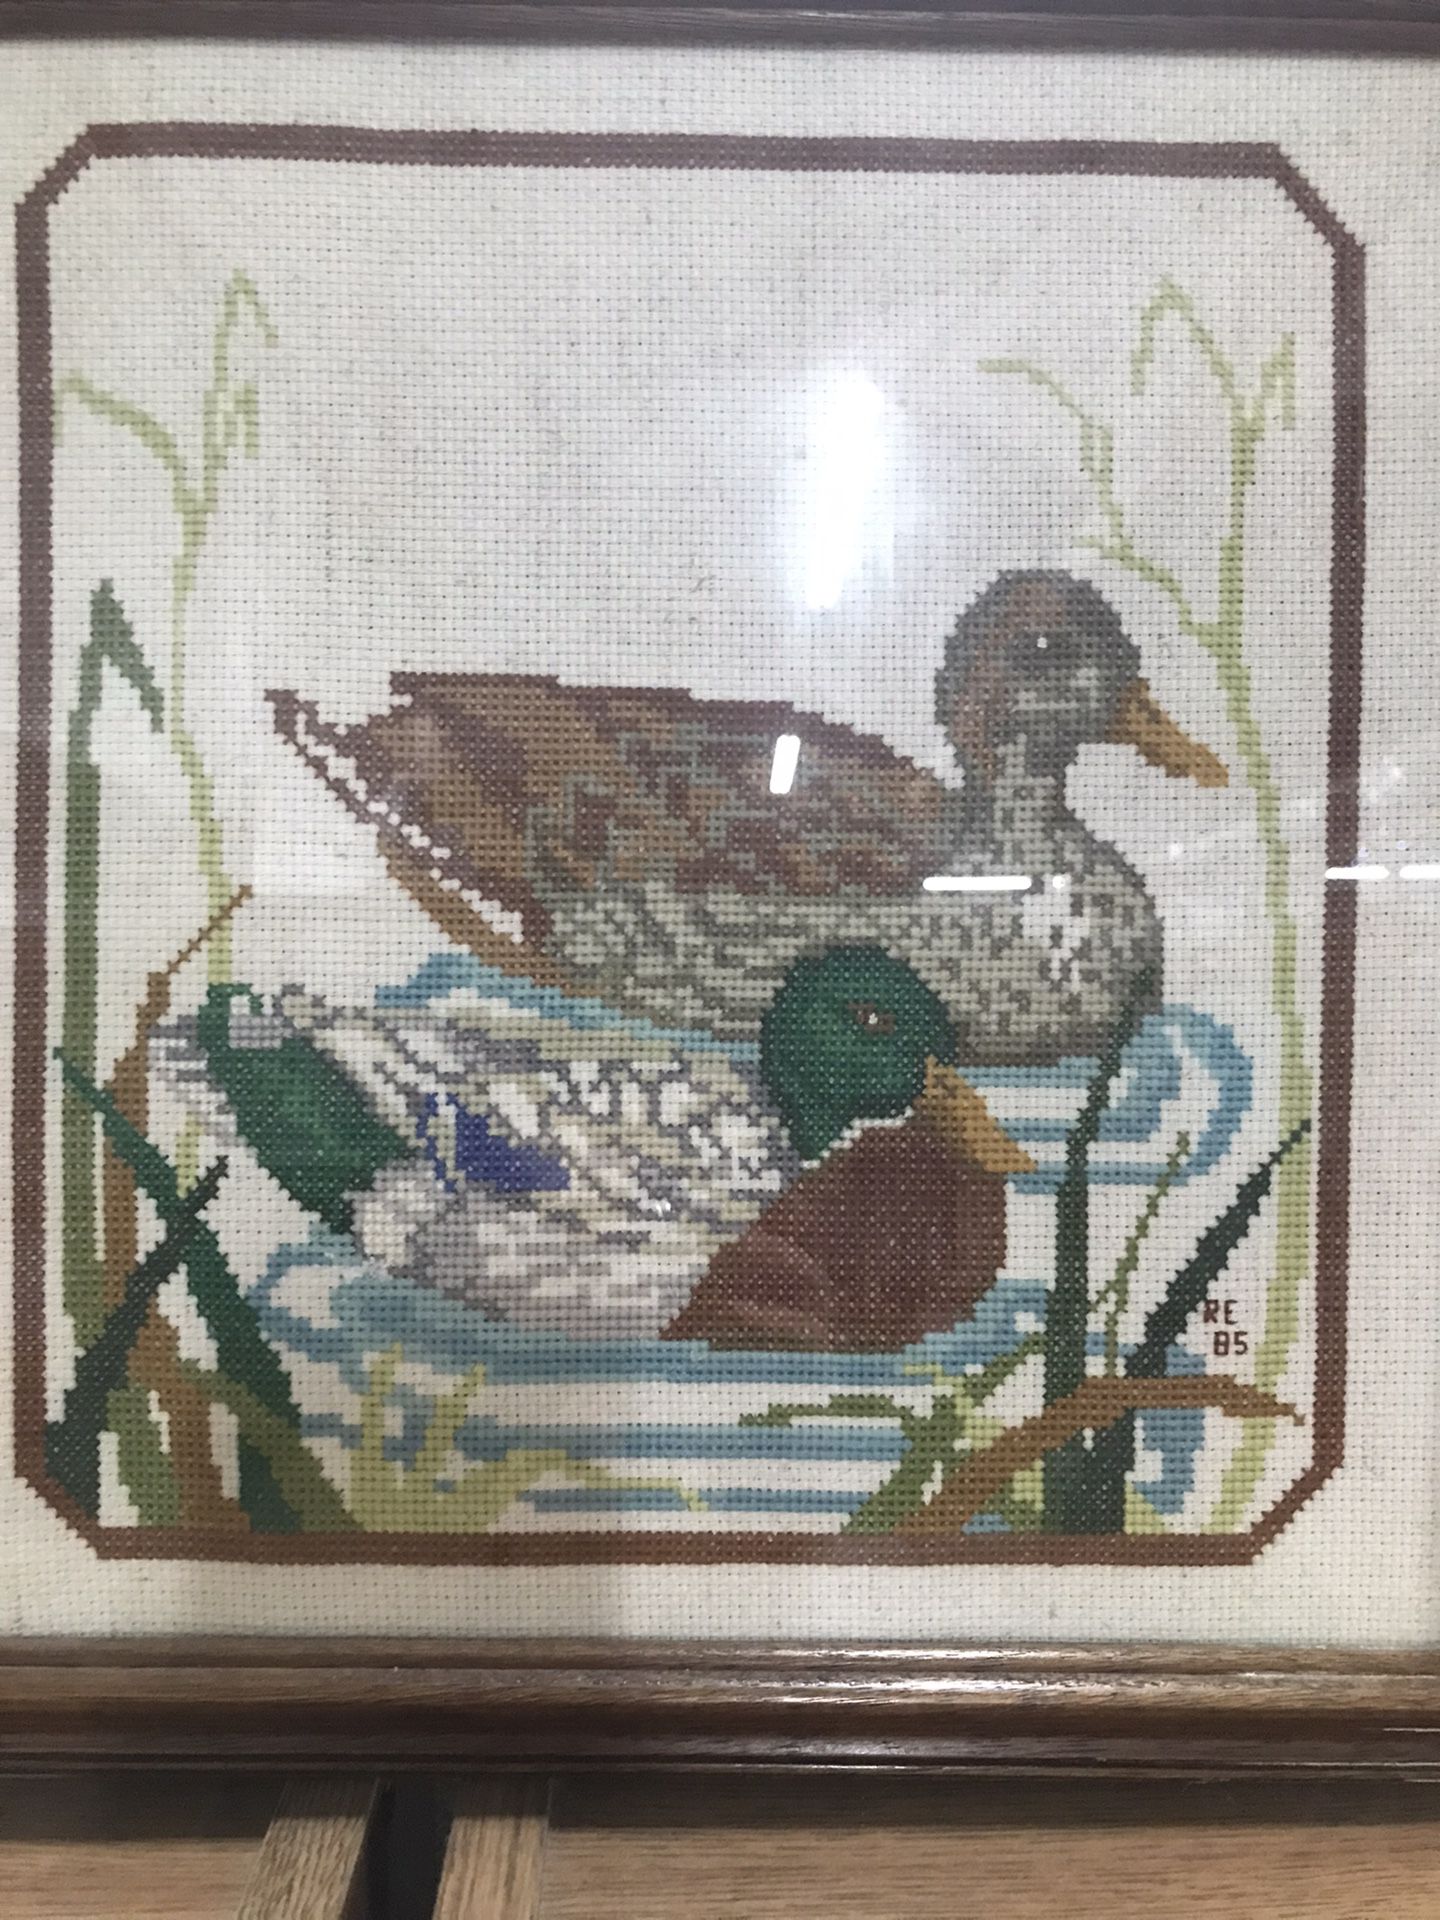 Duck Framed Cross Stitched Pictures Oval And Square $30 For The Pair